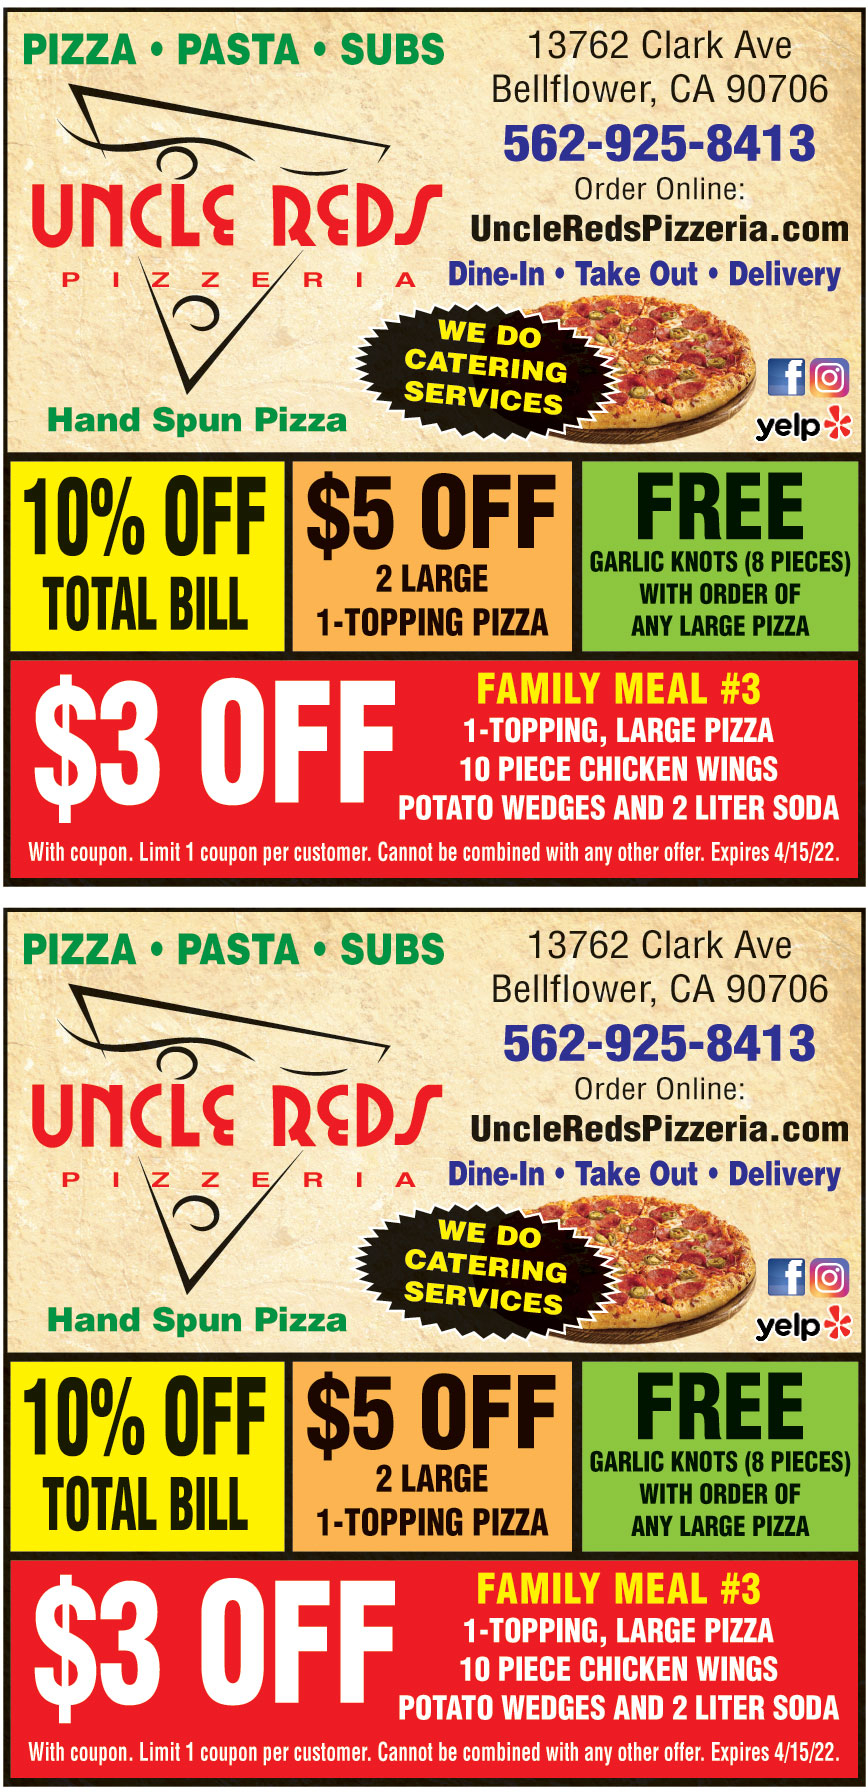 UNCLE REDS PIZZERIA